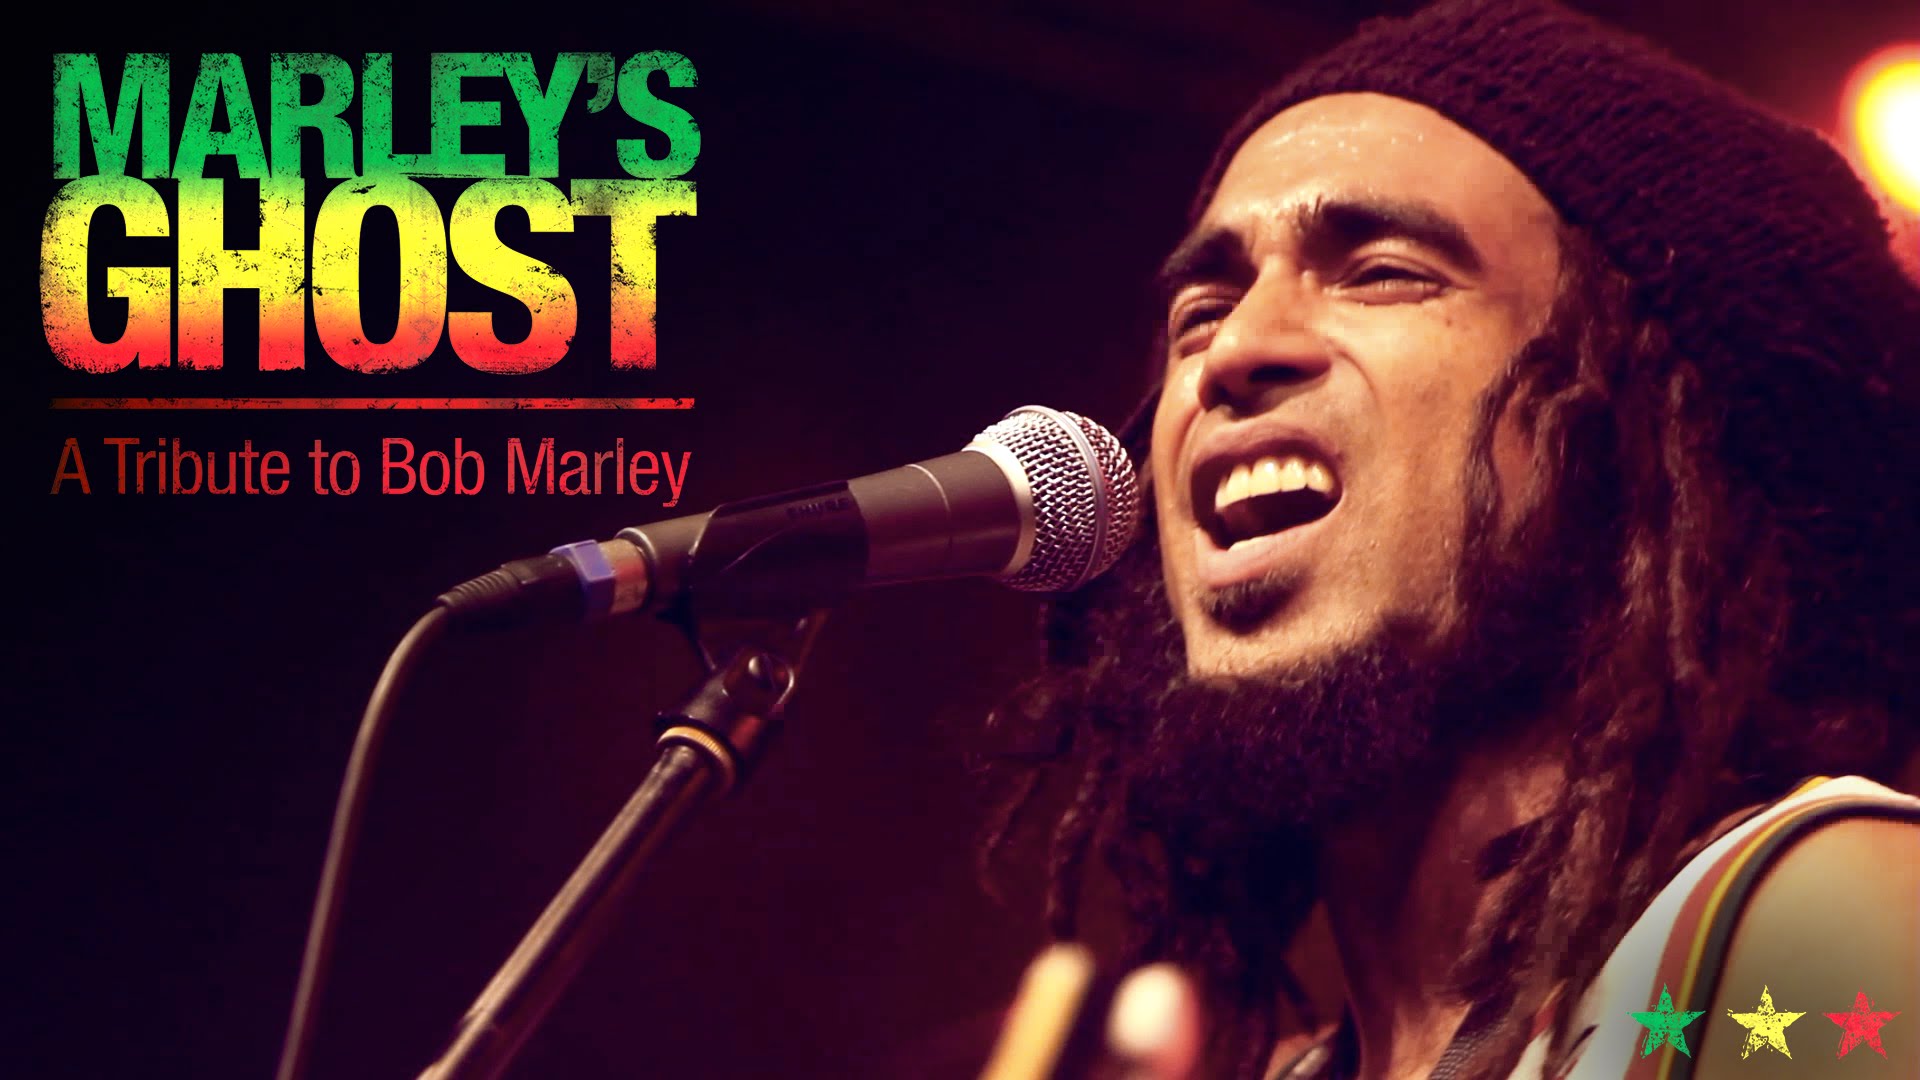 Marley's Ghost - A Tribute To Bob Marley [10/21/2015]